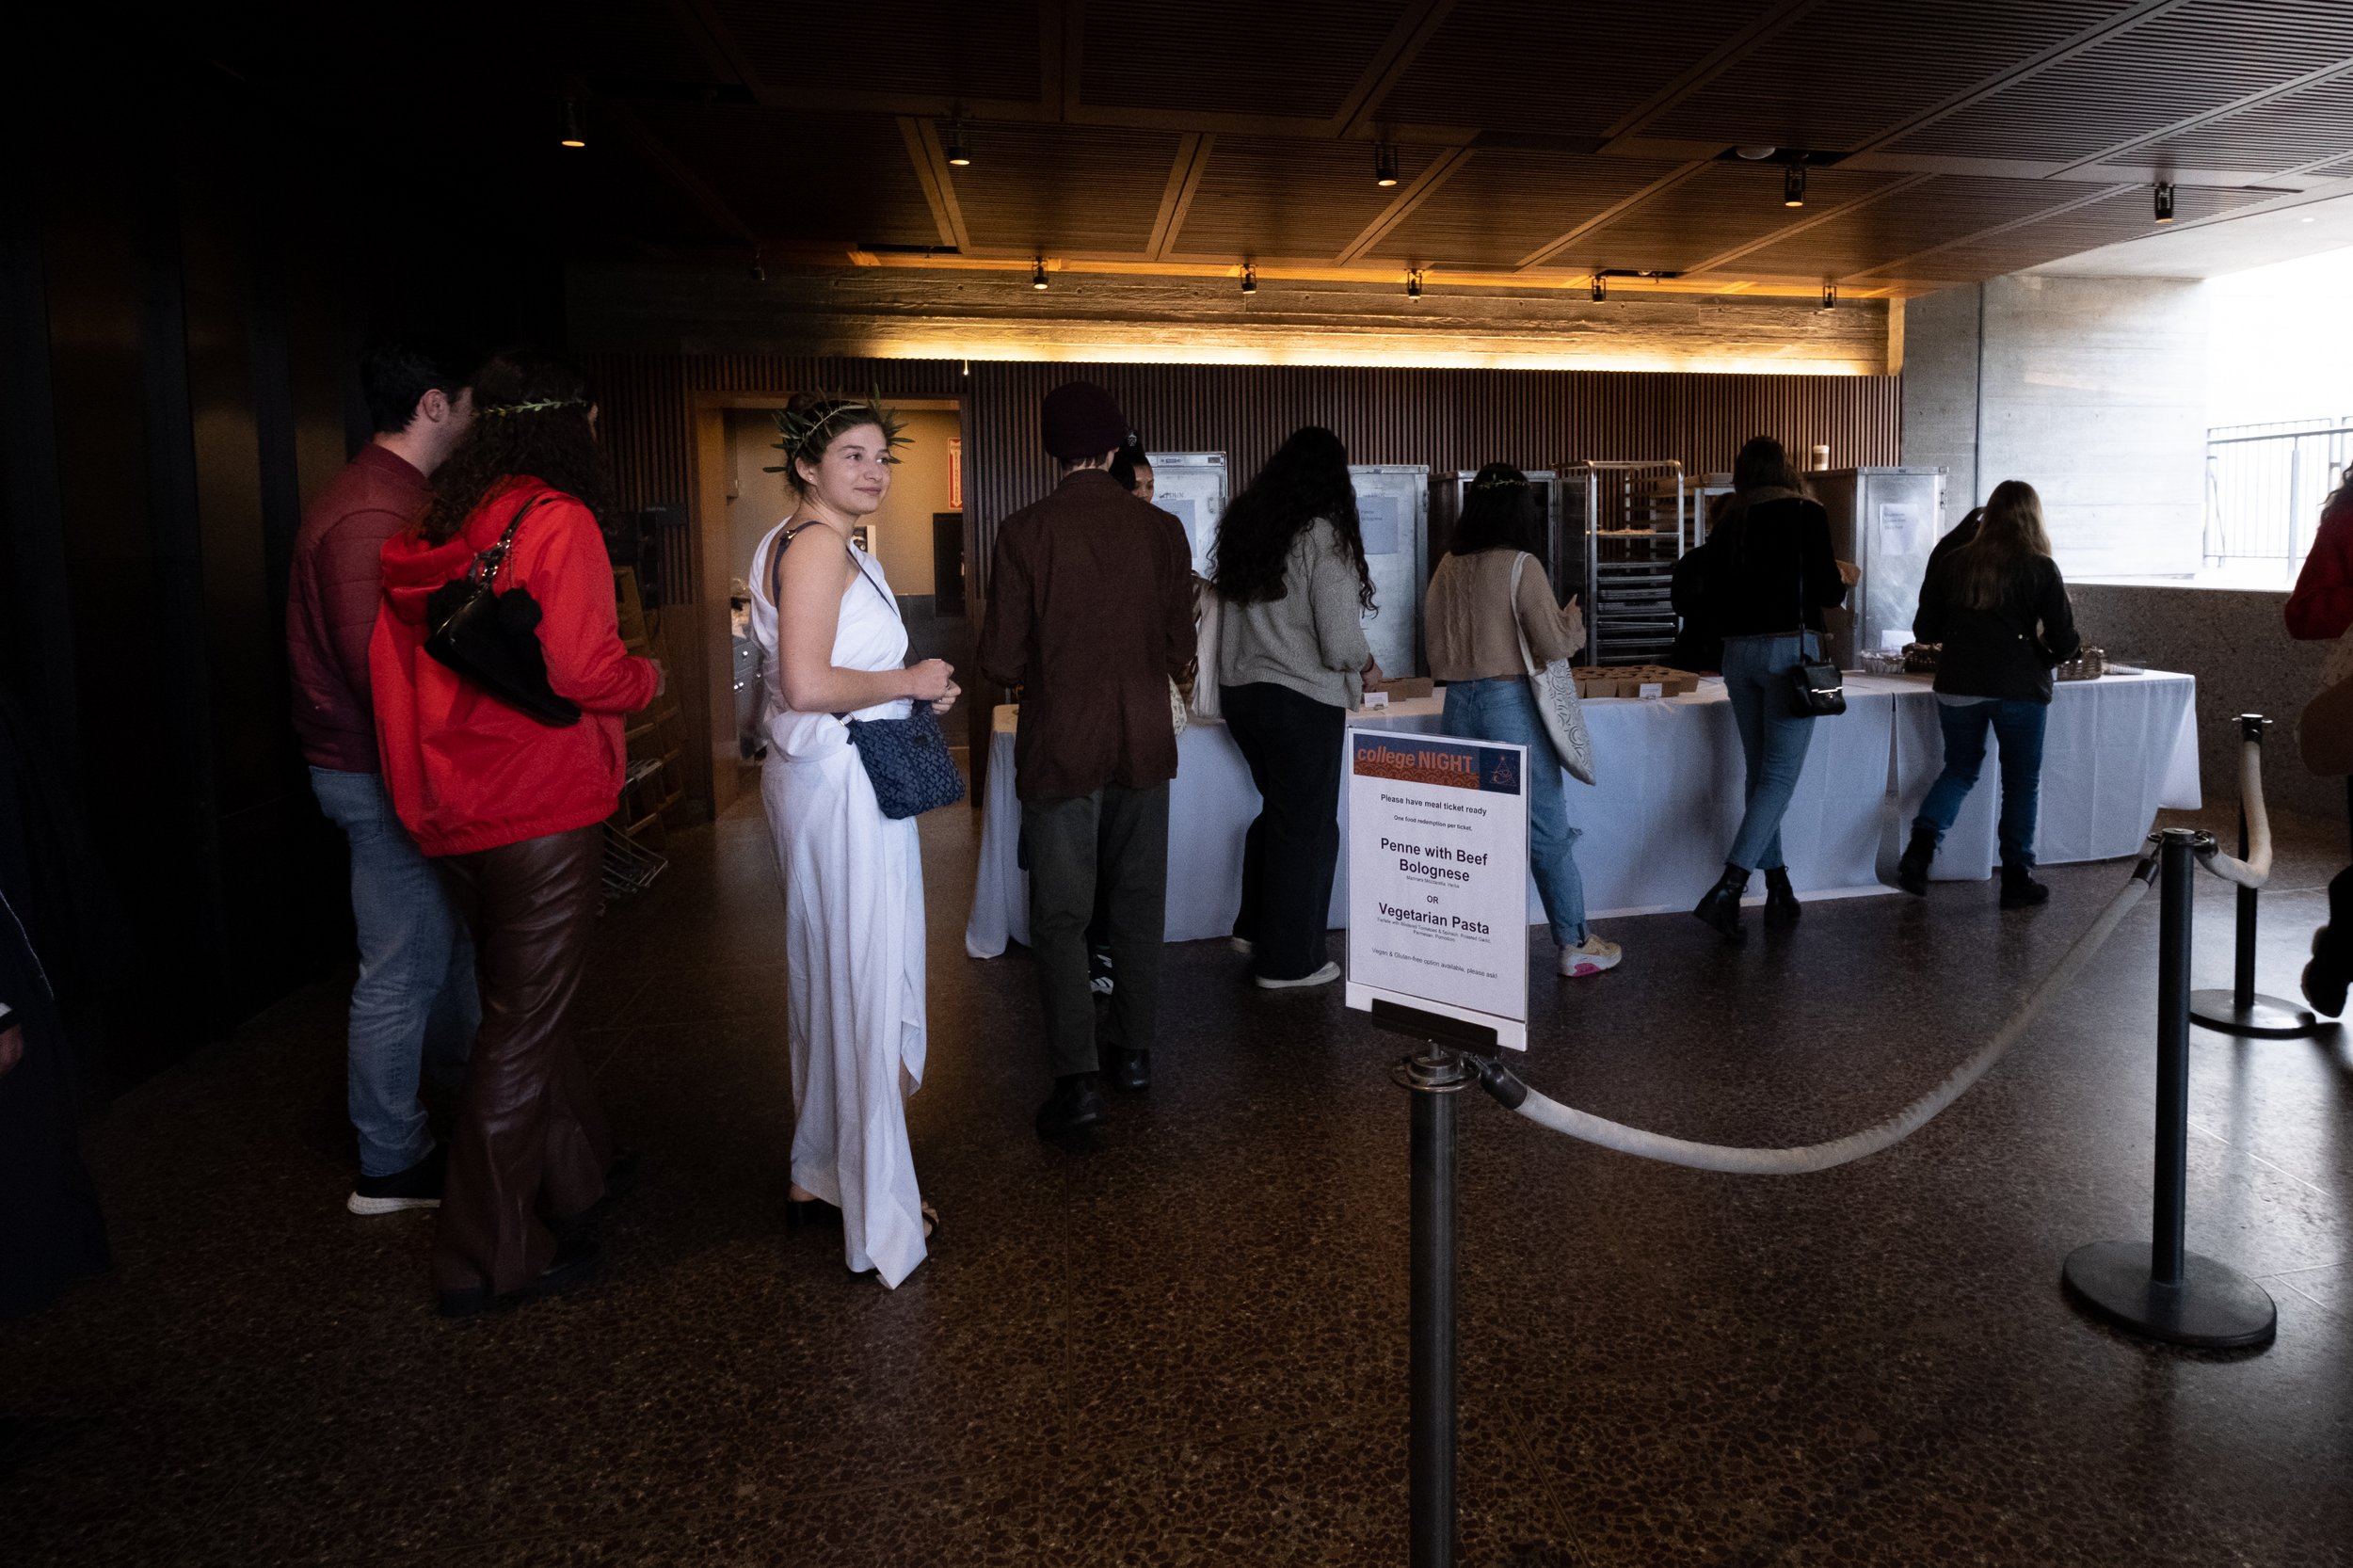  Students from various Southern California colleges wait in line for dinner at College Night at the Getty Villa  in Pacific Palisades, Calif. on Wednesday, March 22, 2023 at College Night. Students were invited to come dressed in costume. On the menu